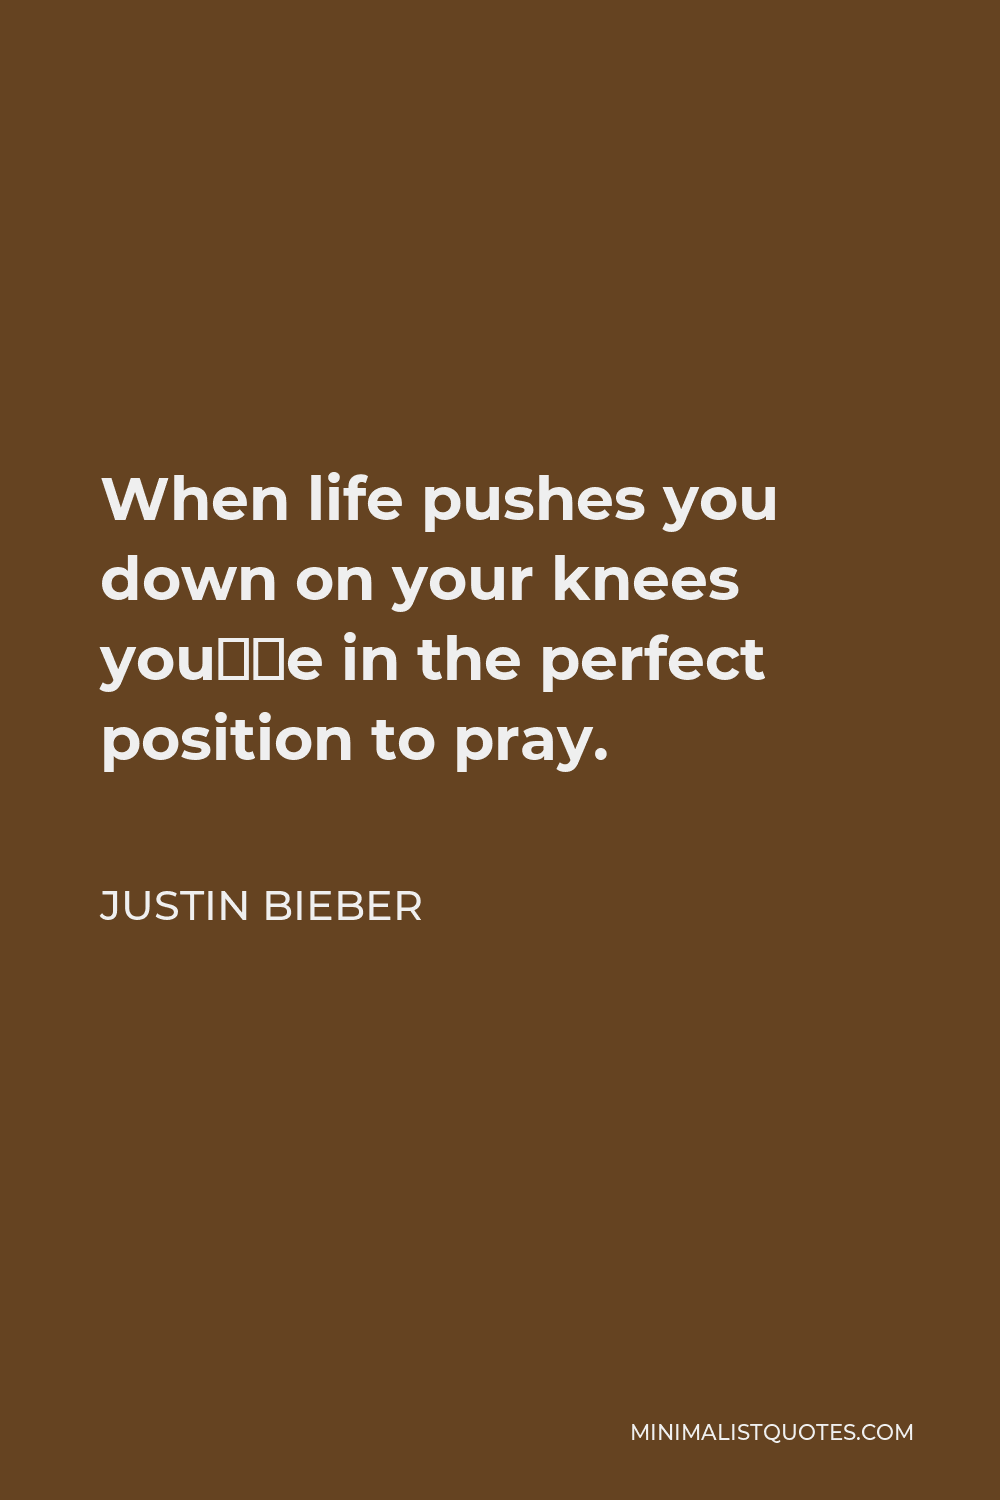 Justin Bieber Quote - When life pushes you down on your knees you’re in the perfect position to pray.